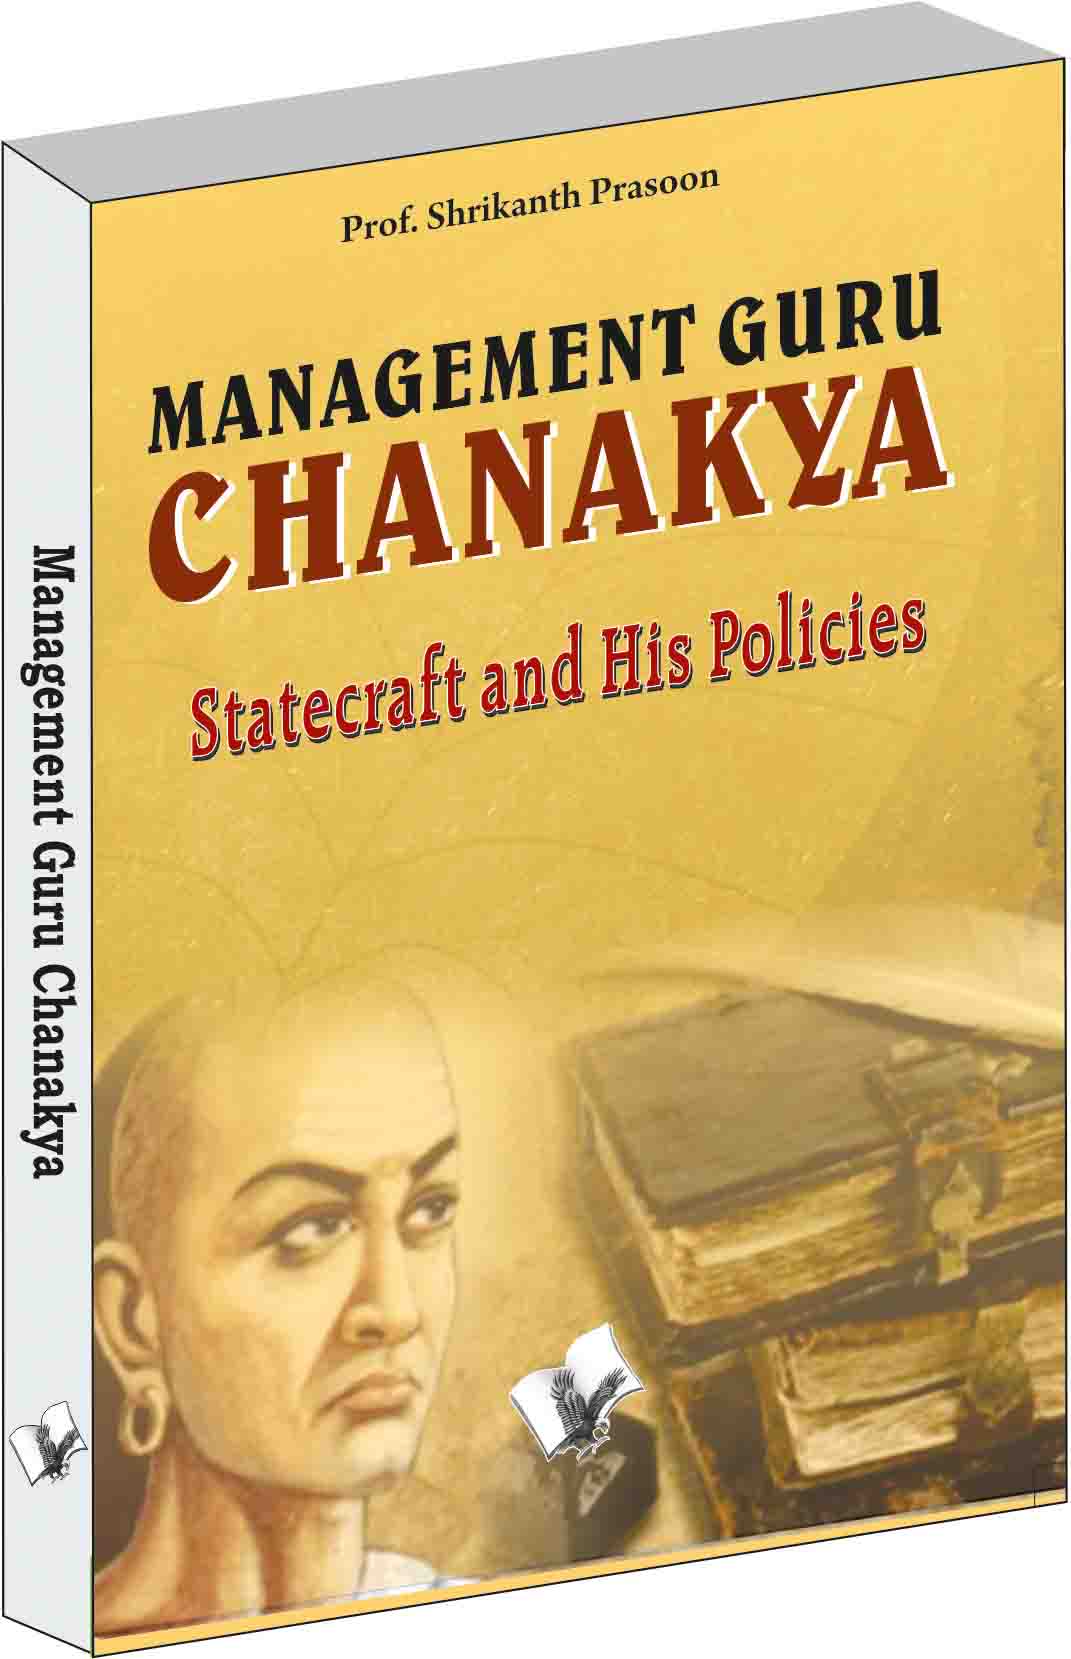 Management Guru Chanakya-Statecraft and his policies that changed the destiny of India
 